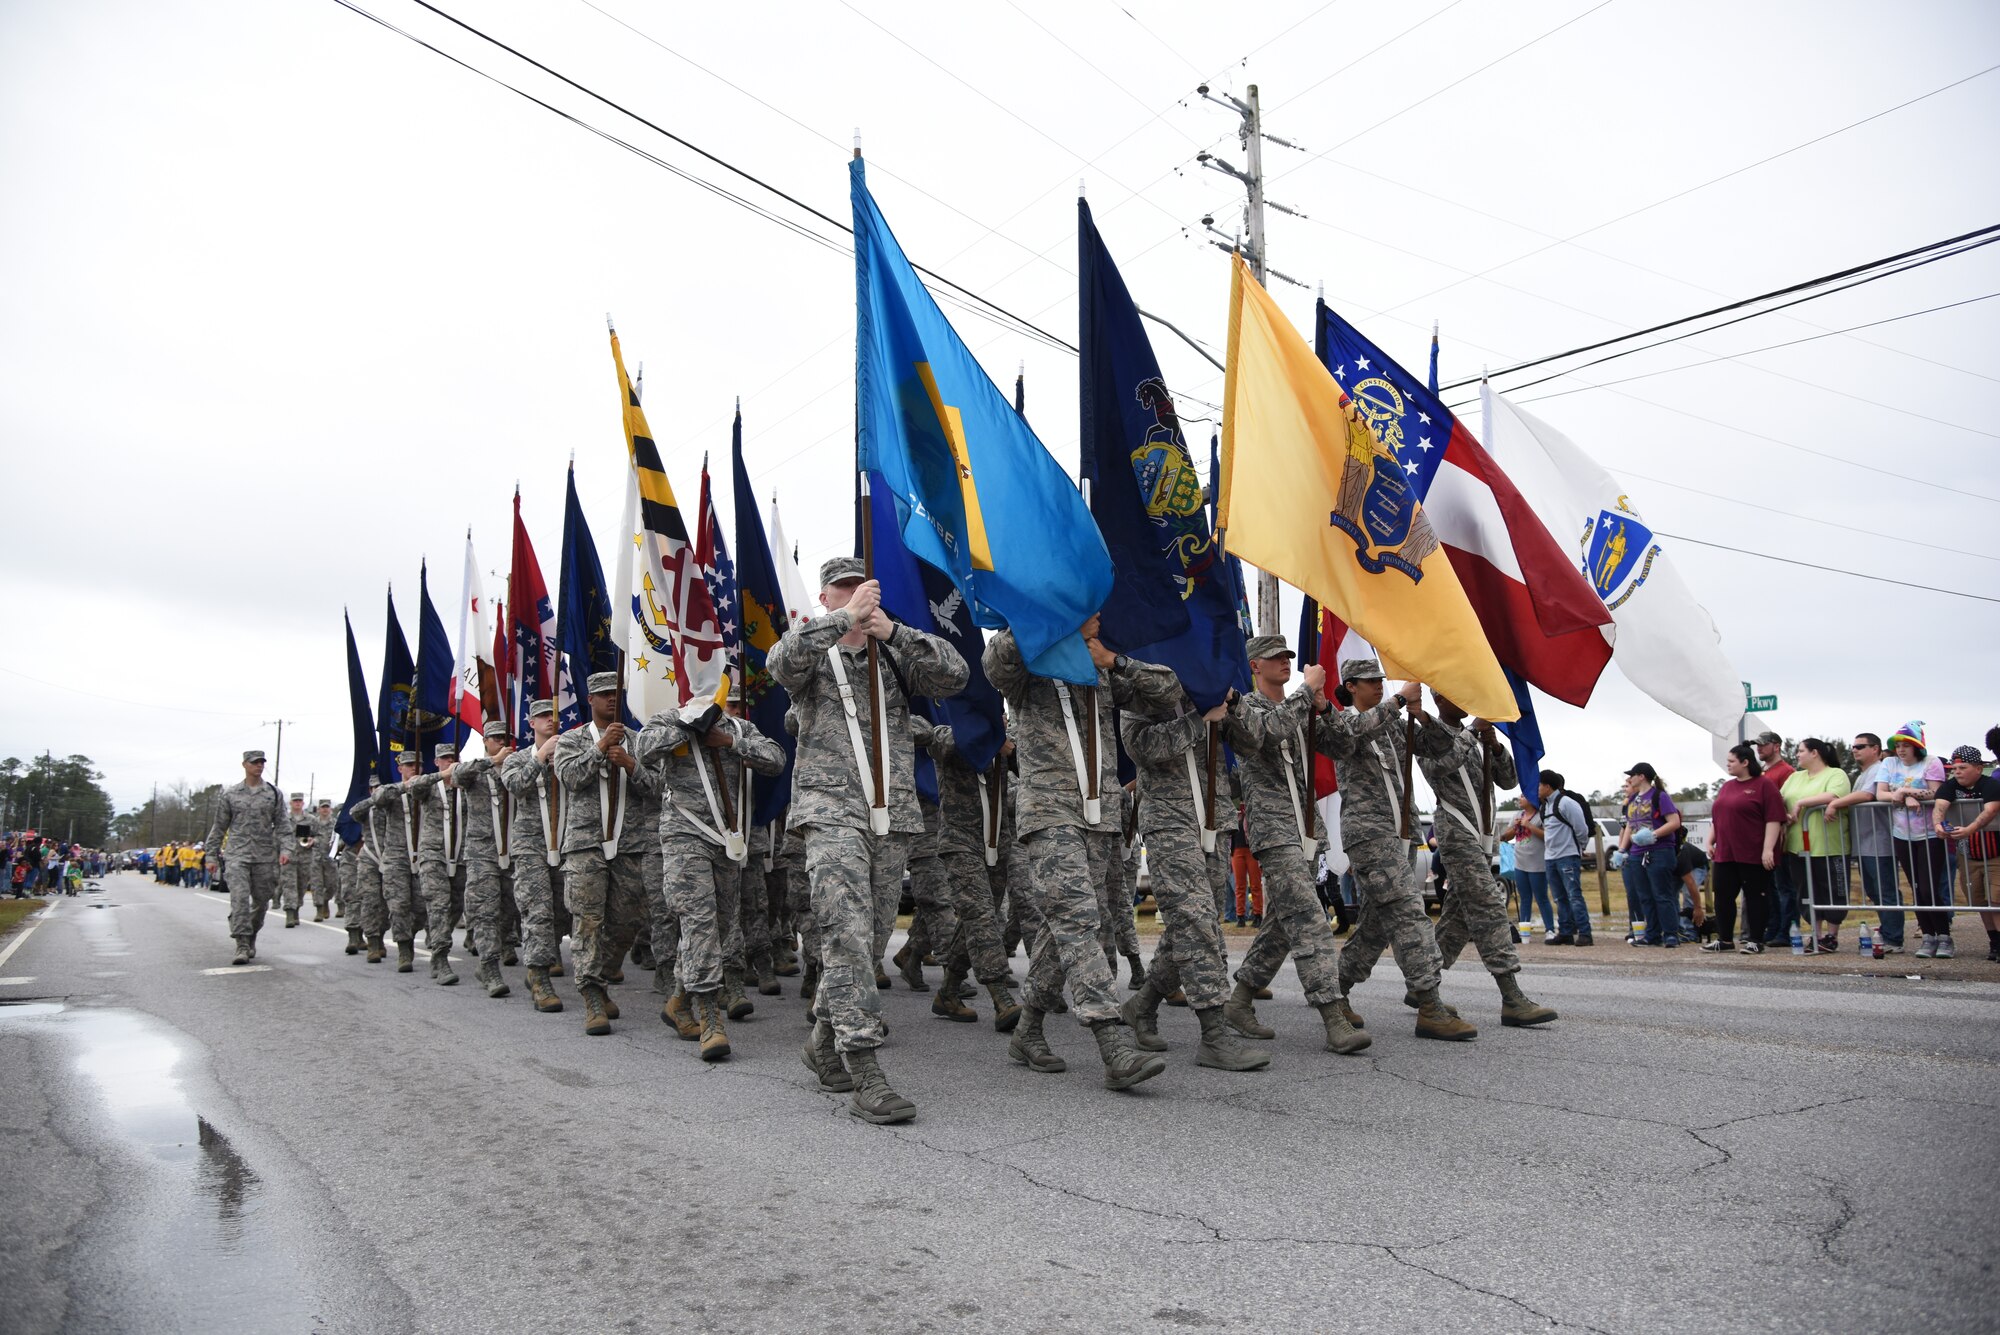 Keesler Airmen carry the 50 state flags in the North Bay Area Mardi Gras Parade Feb. 11, 2018, in D’Iberville, Mississippi. Keesler personnel participate in local parades every Mardi Gras season to show their support of the communities surrounding the installation. (U.S. Air Force photo by Kemberly Groue)